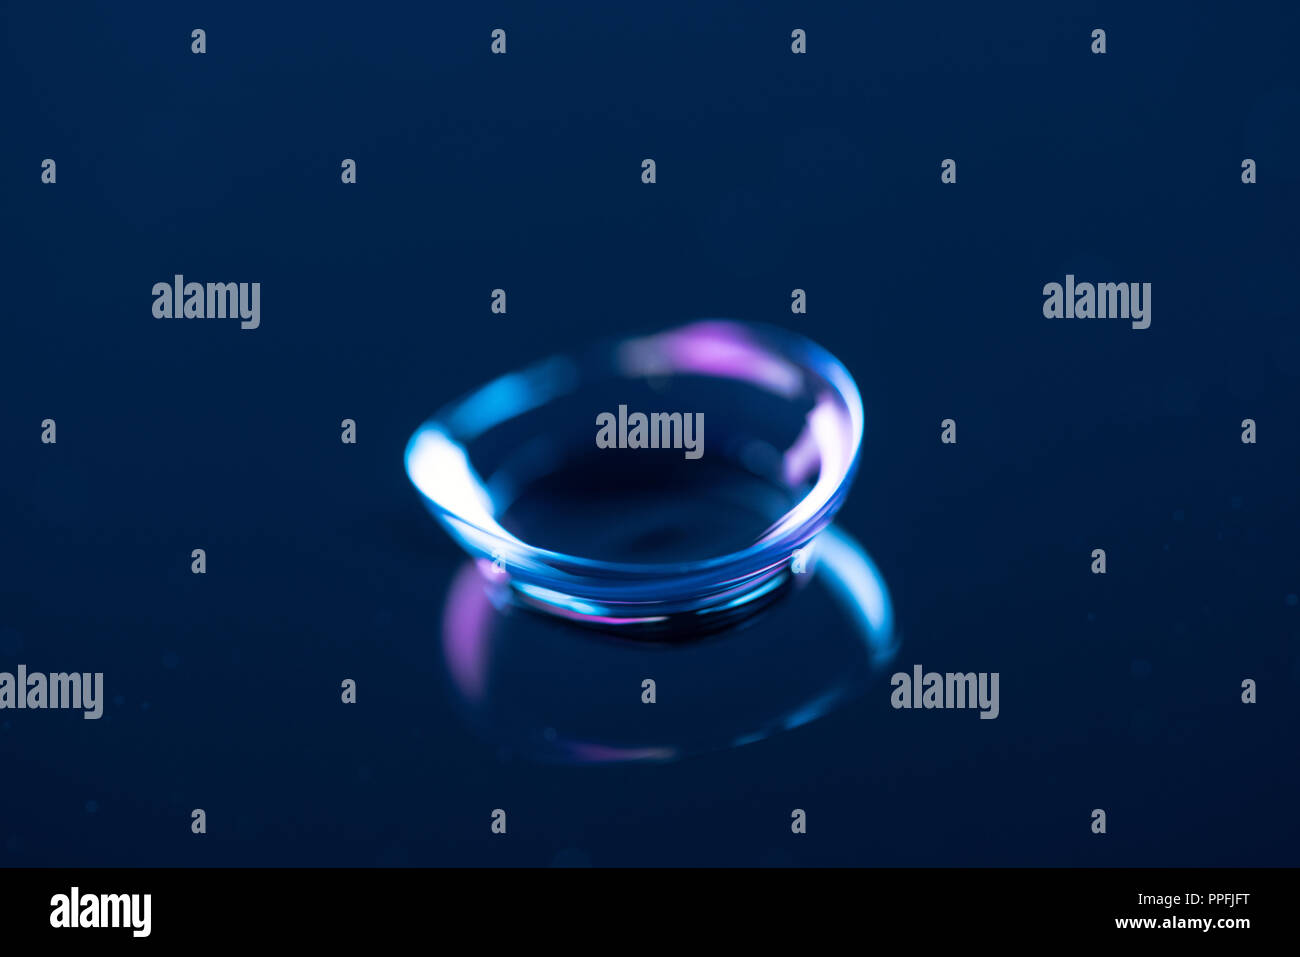 close up view of contact lense on blue backdrop Stock Photo